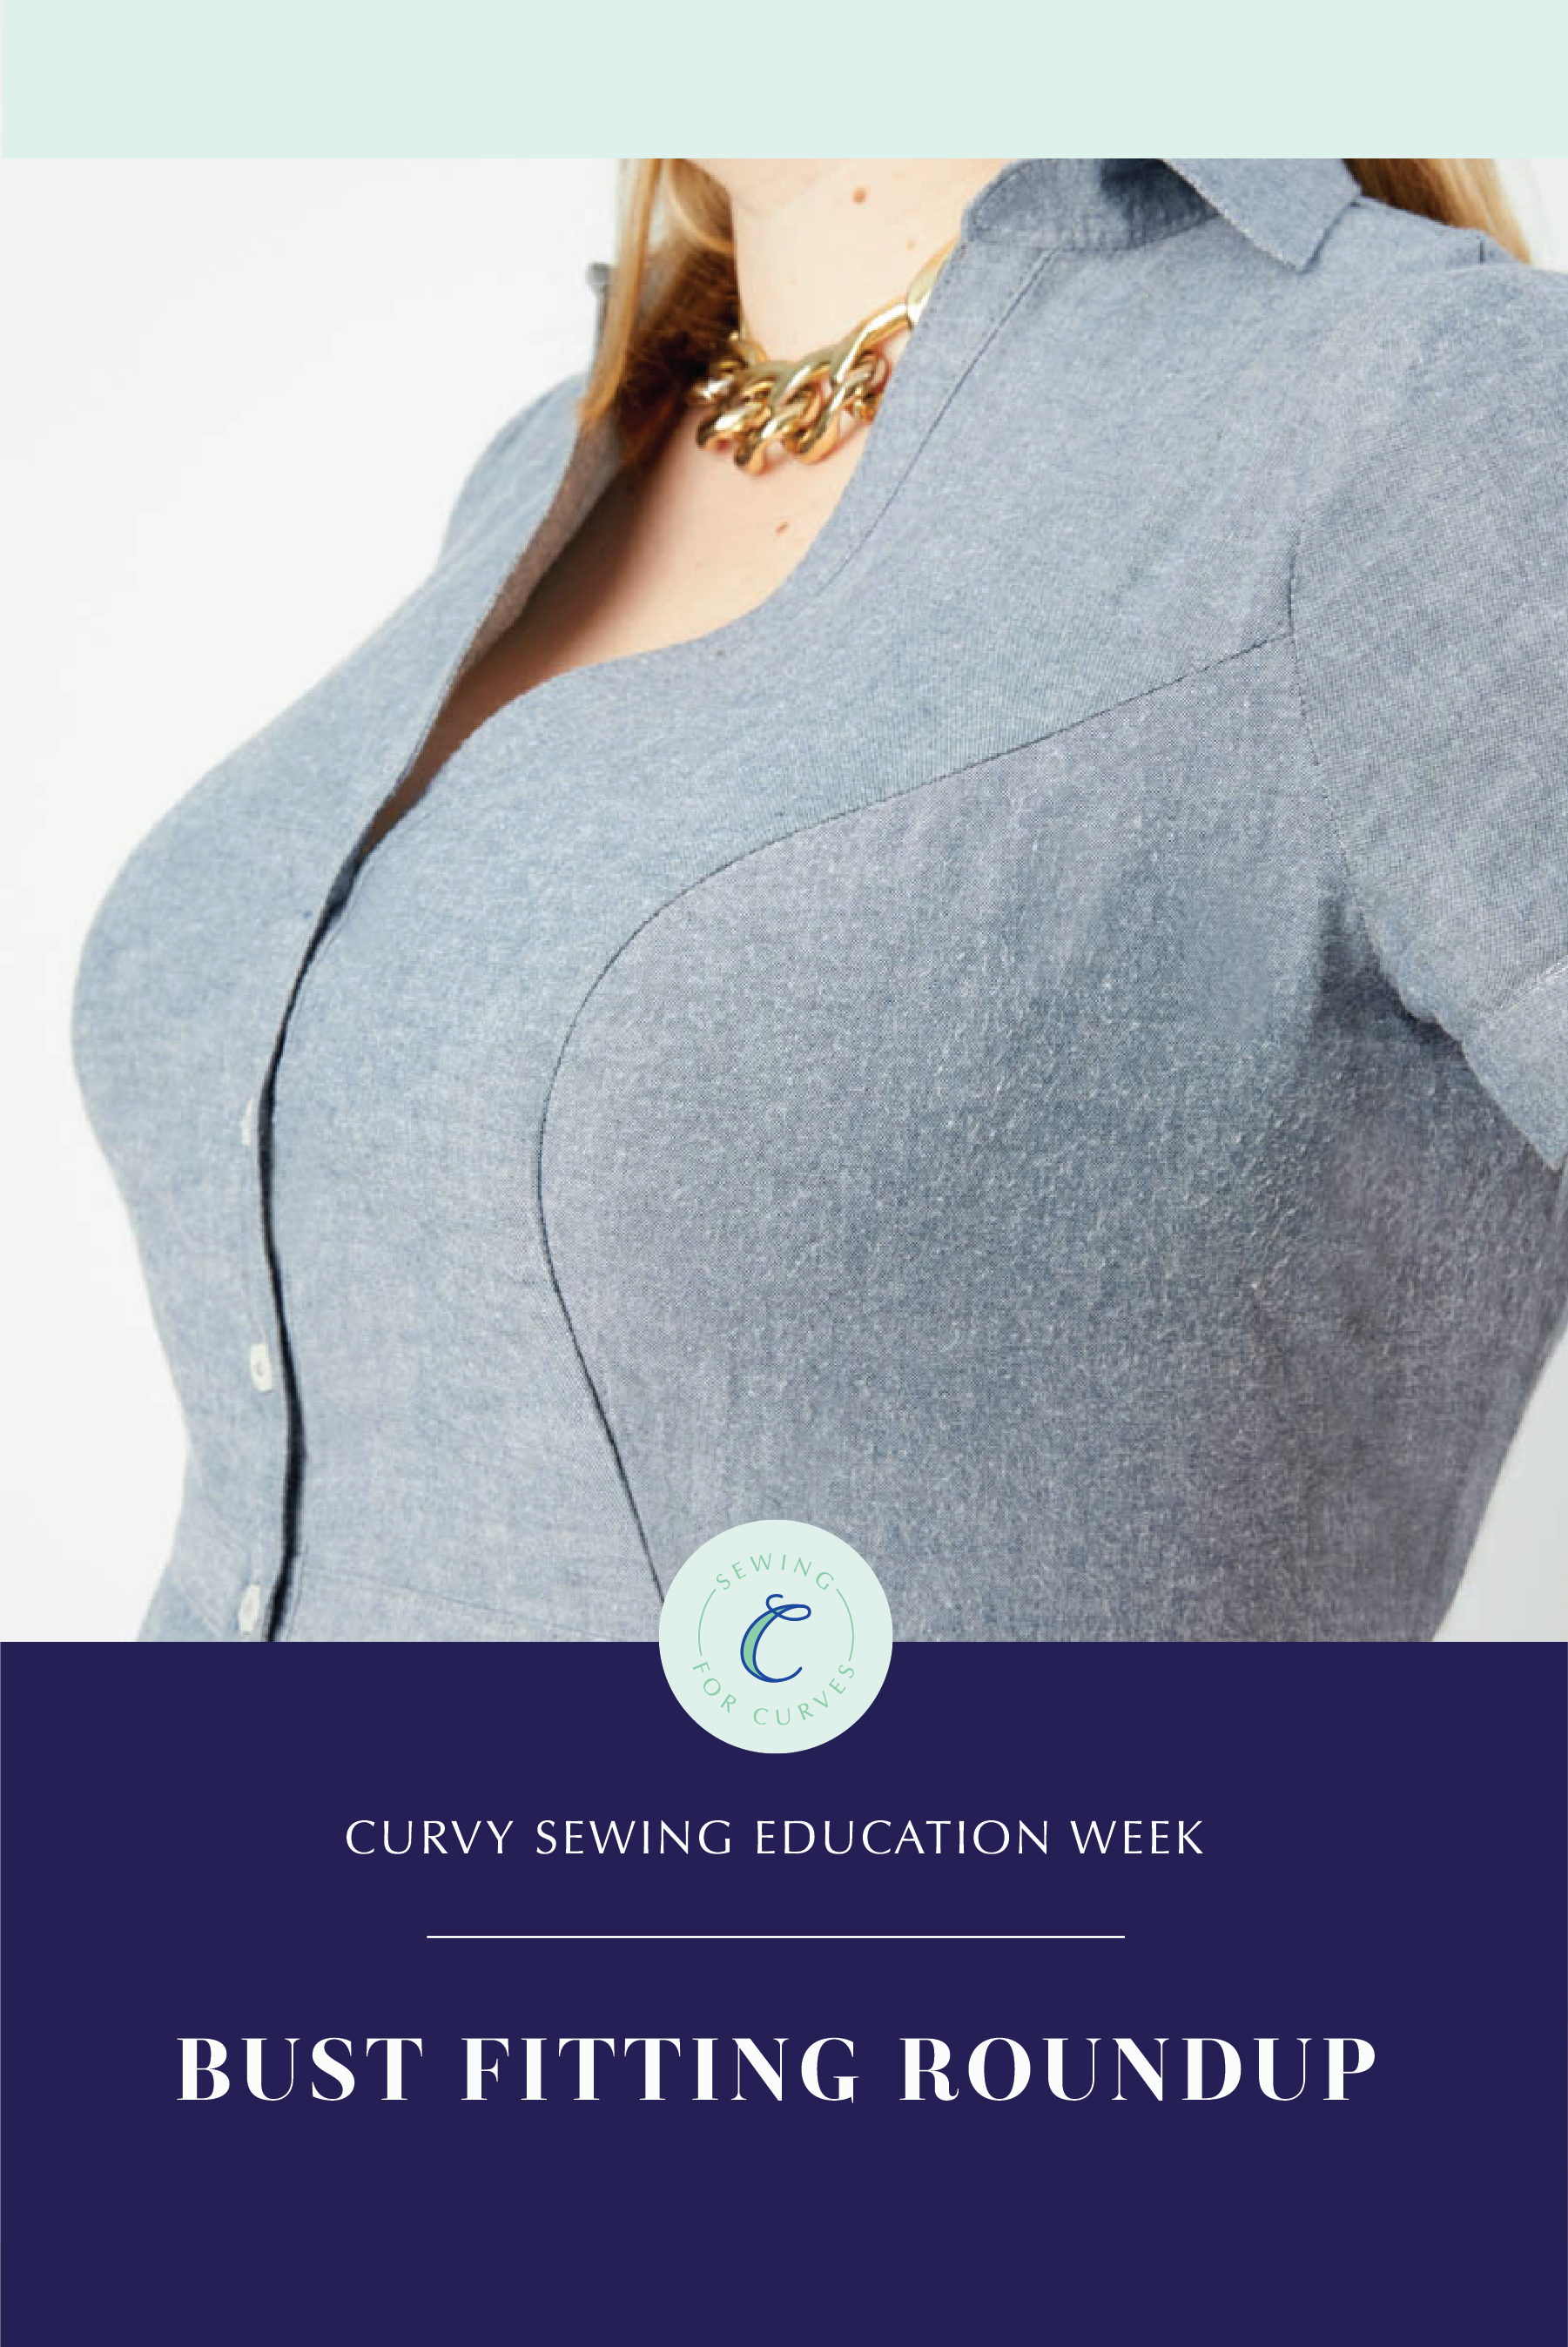 Curvy Sewing Education Week: Bust Fitting Roundup